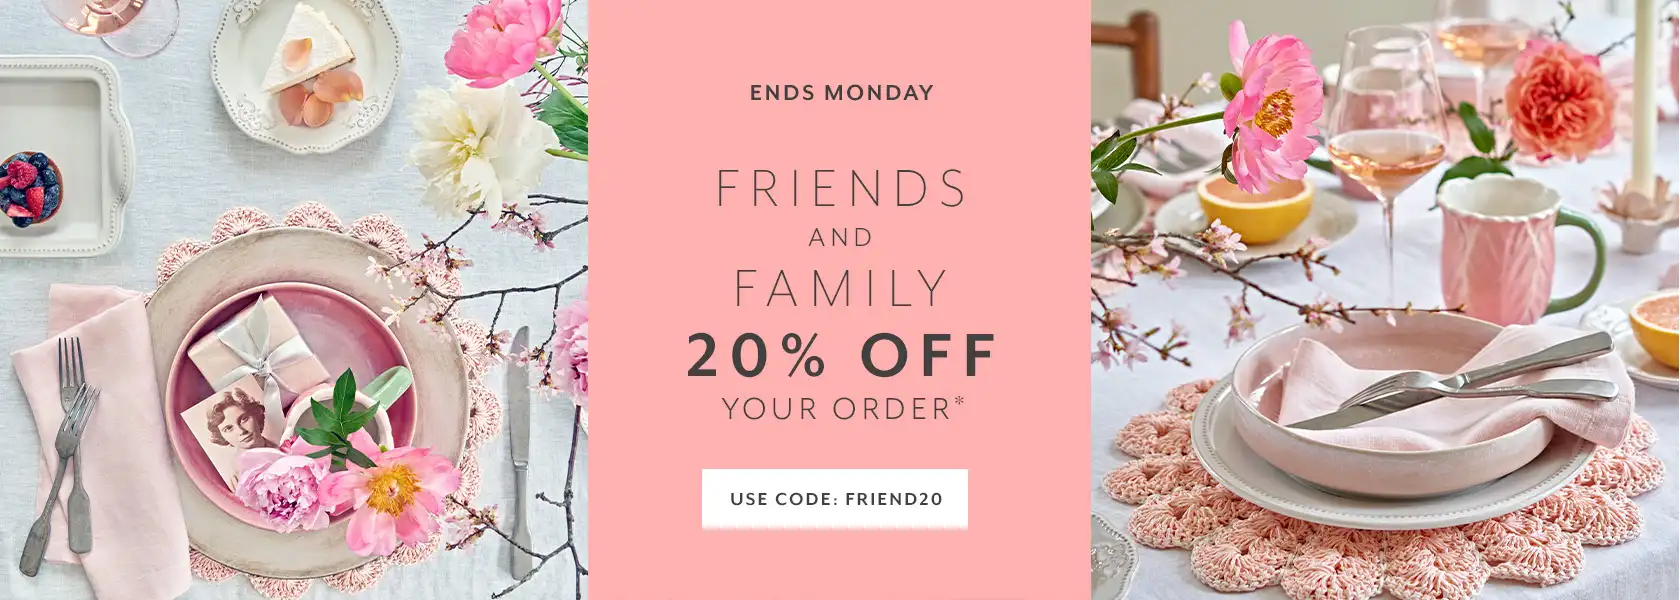 Ends Monday Friends and Family 20% off your order. Use code FRIEND20. Shop now.